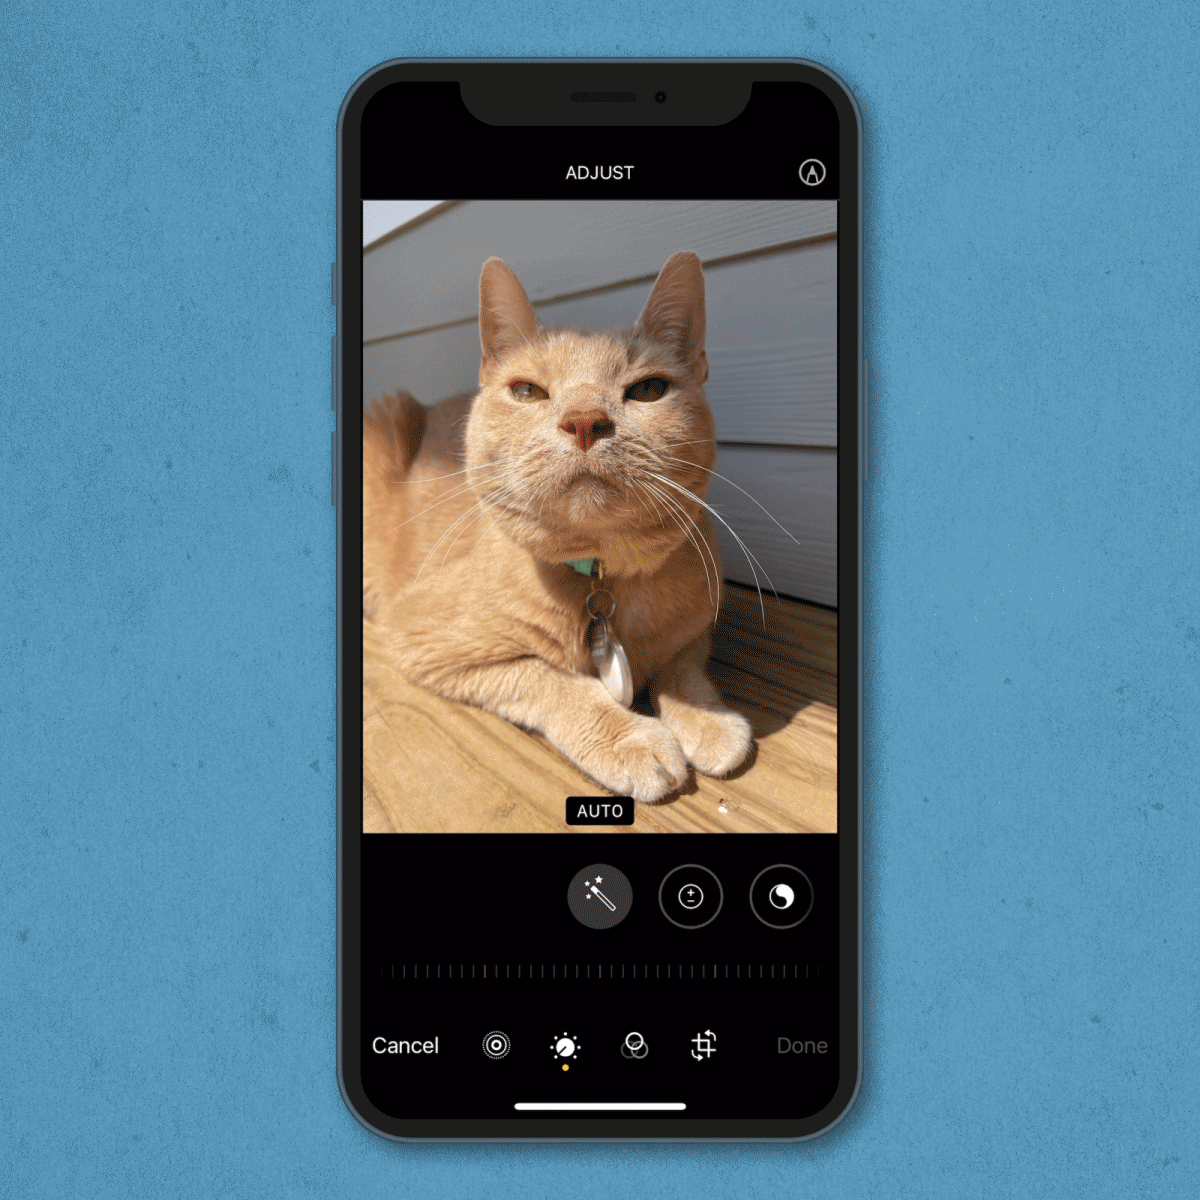 gif showing how to mirror photos on an iPhone